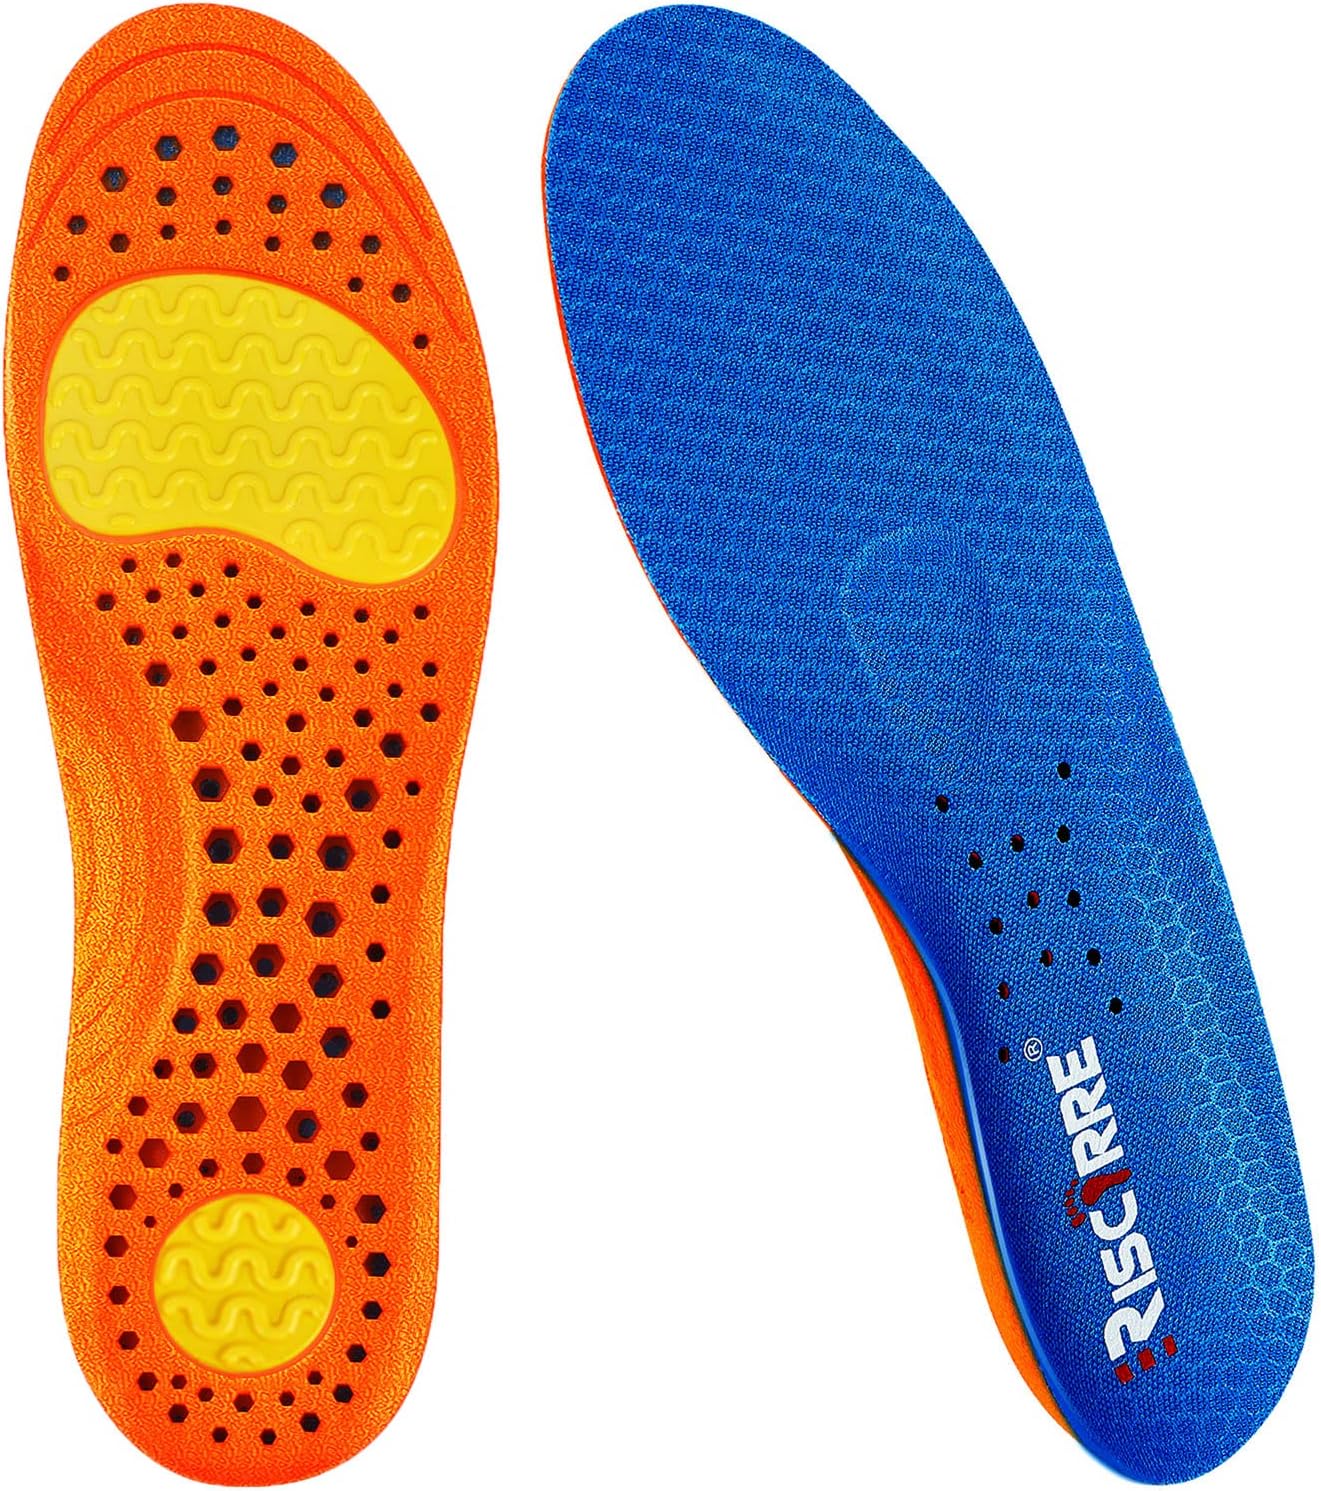 Insoles for Men and Women- Shock Absorption Cushioning [...]